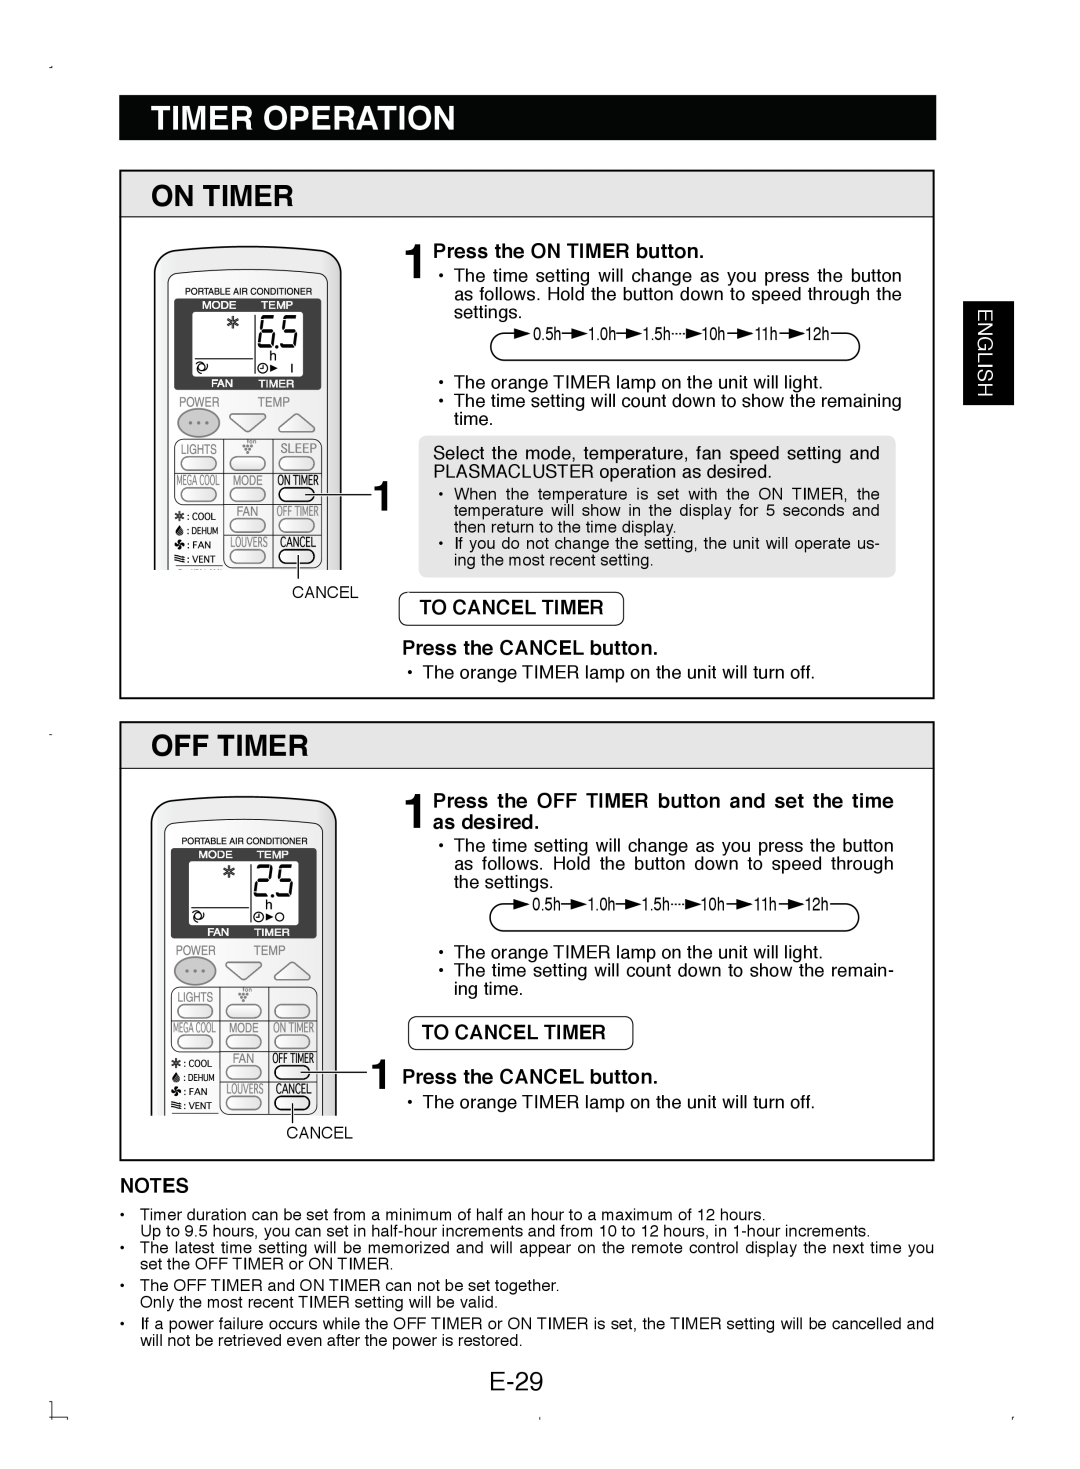 Sony CV-P12PX operation manual Timer Operation, On Timer, Off Timer, E-29, 1.0h, 1.5h, 0.5h 